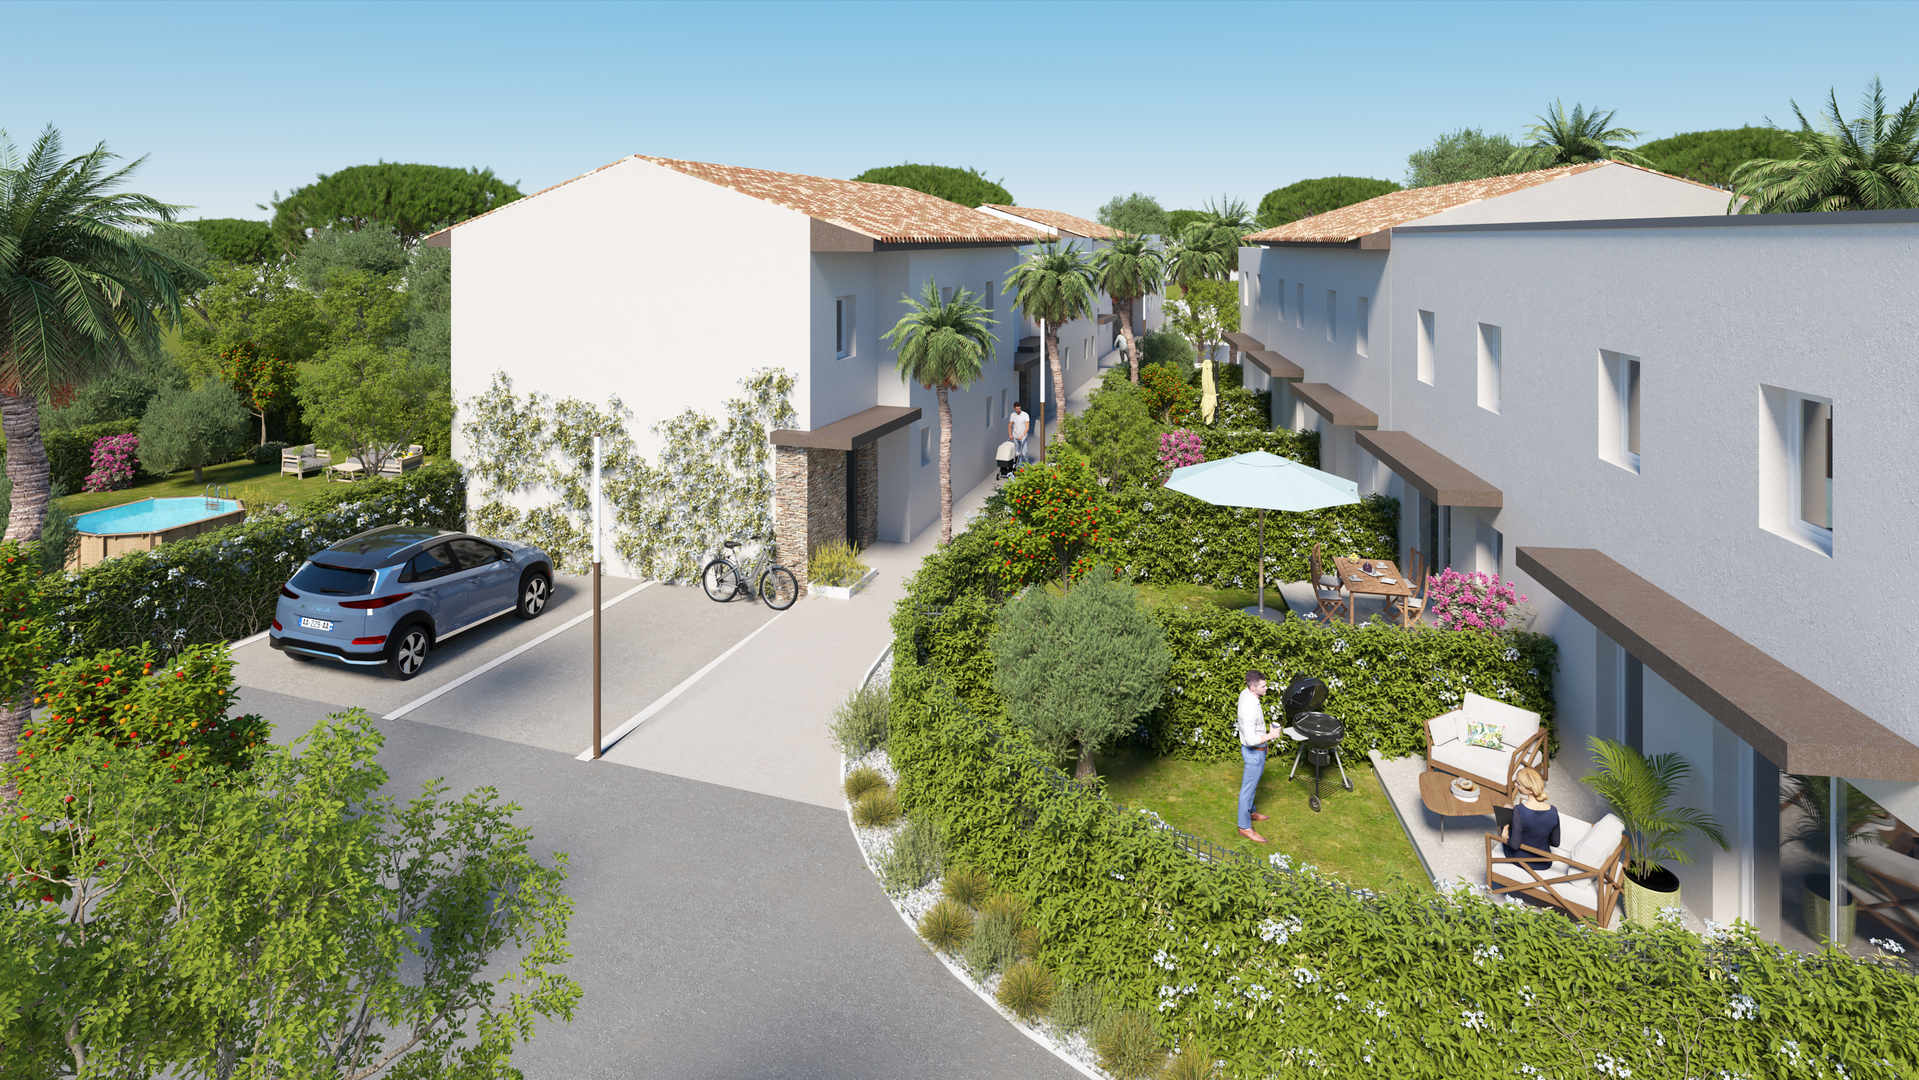 Programme immobilier neuf DOMAINE DES LICES